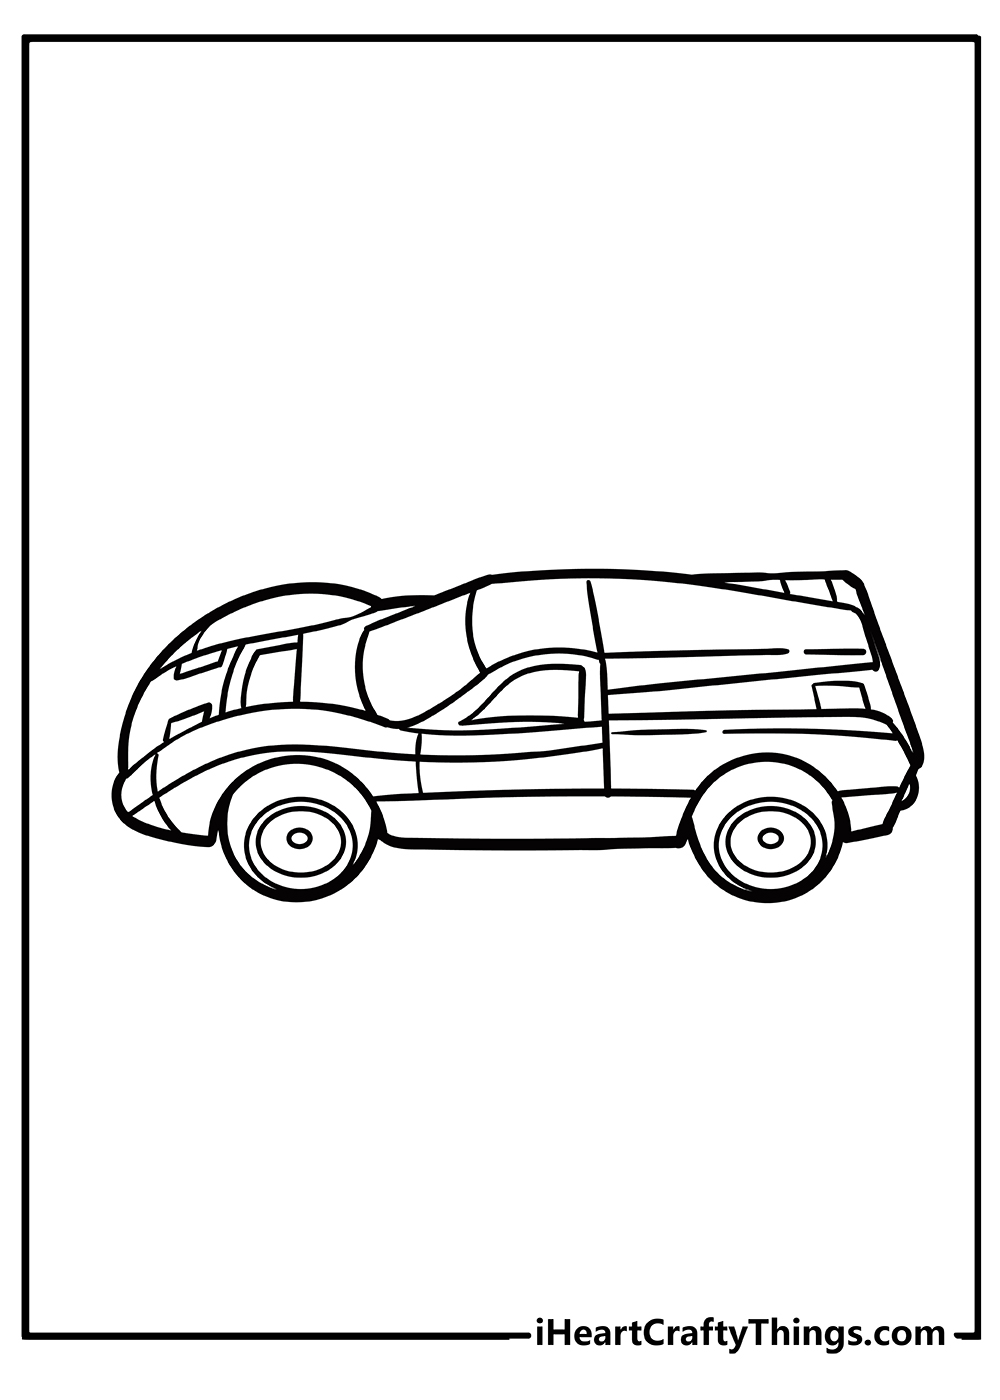 Hot Wheels Easy Coloring Pages